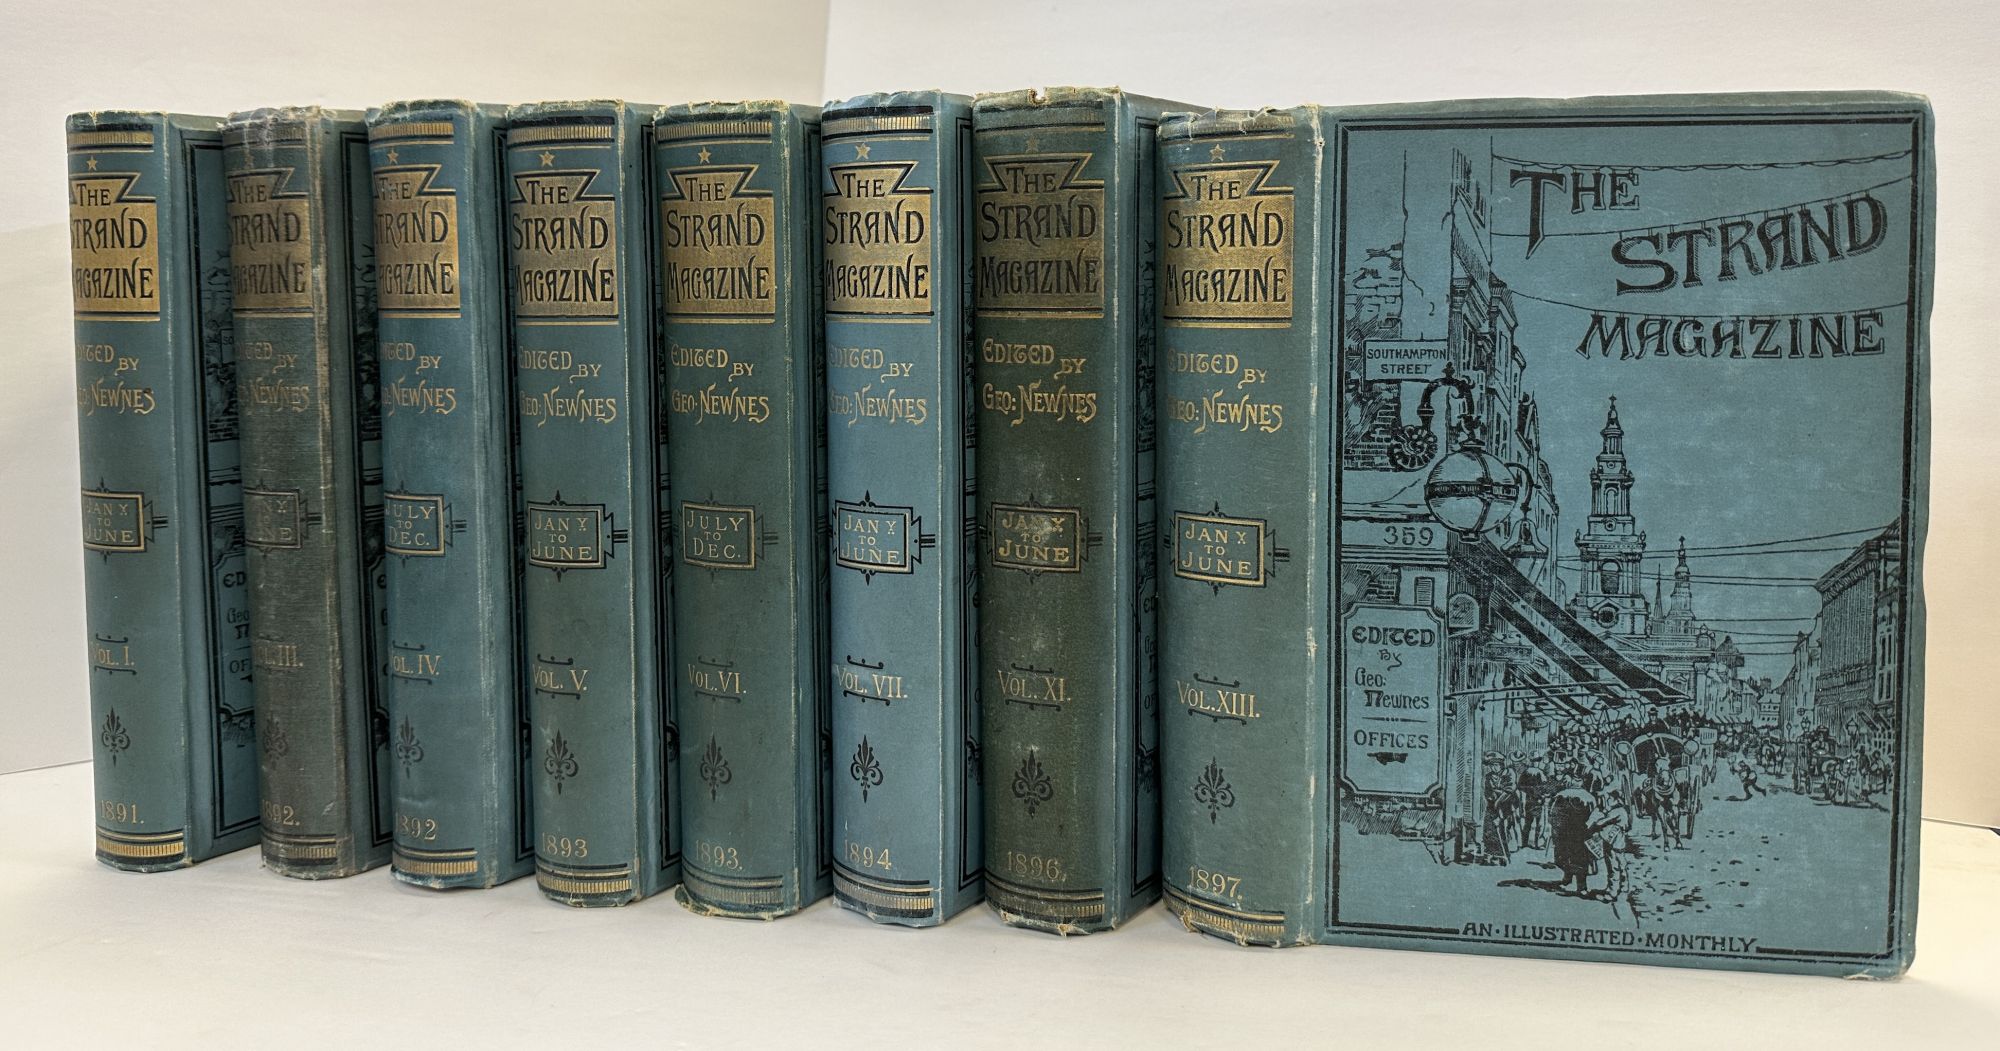 THE STRAND MAGAZINE: AN ILLUSTRATED MONTHLY EIGHT VOLUMES by George Newnes,  A. Conan Doyle, Rudyard Kipling, Jules Verne, Jean de Paléologue, George 